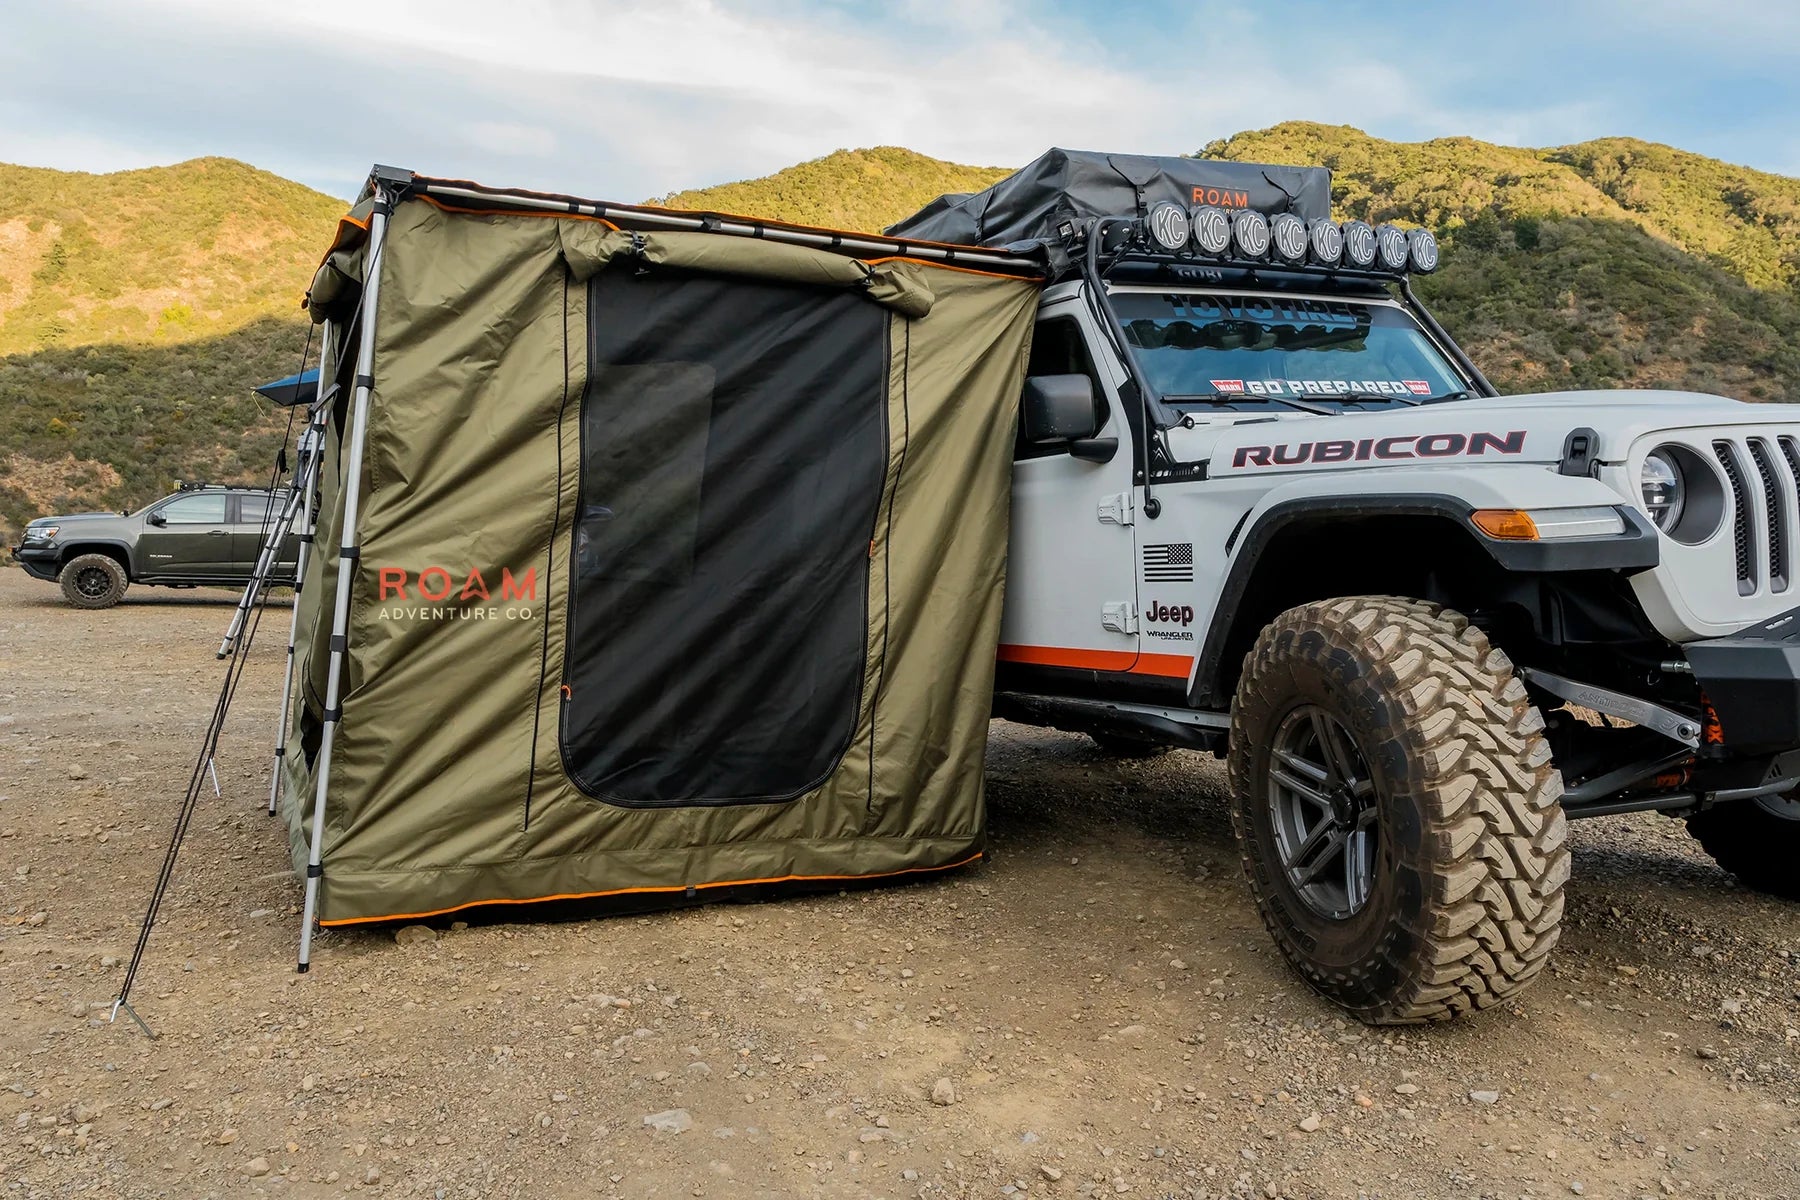 roam adventure co awning room cover for sale near san antonio texas at hawkes outdoors 210-251-2882 green